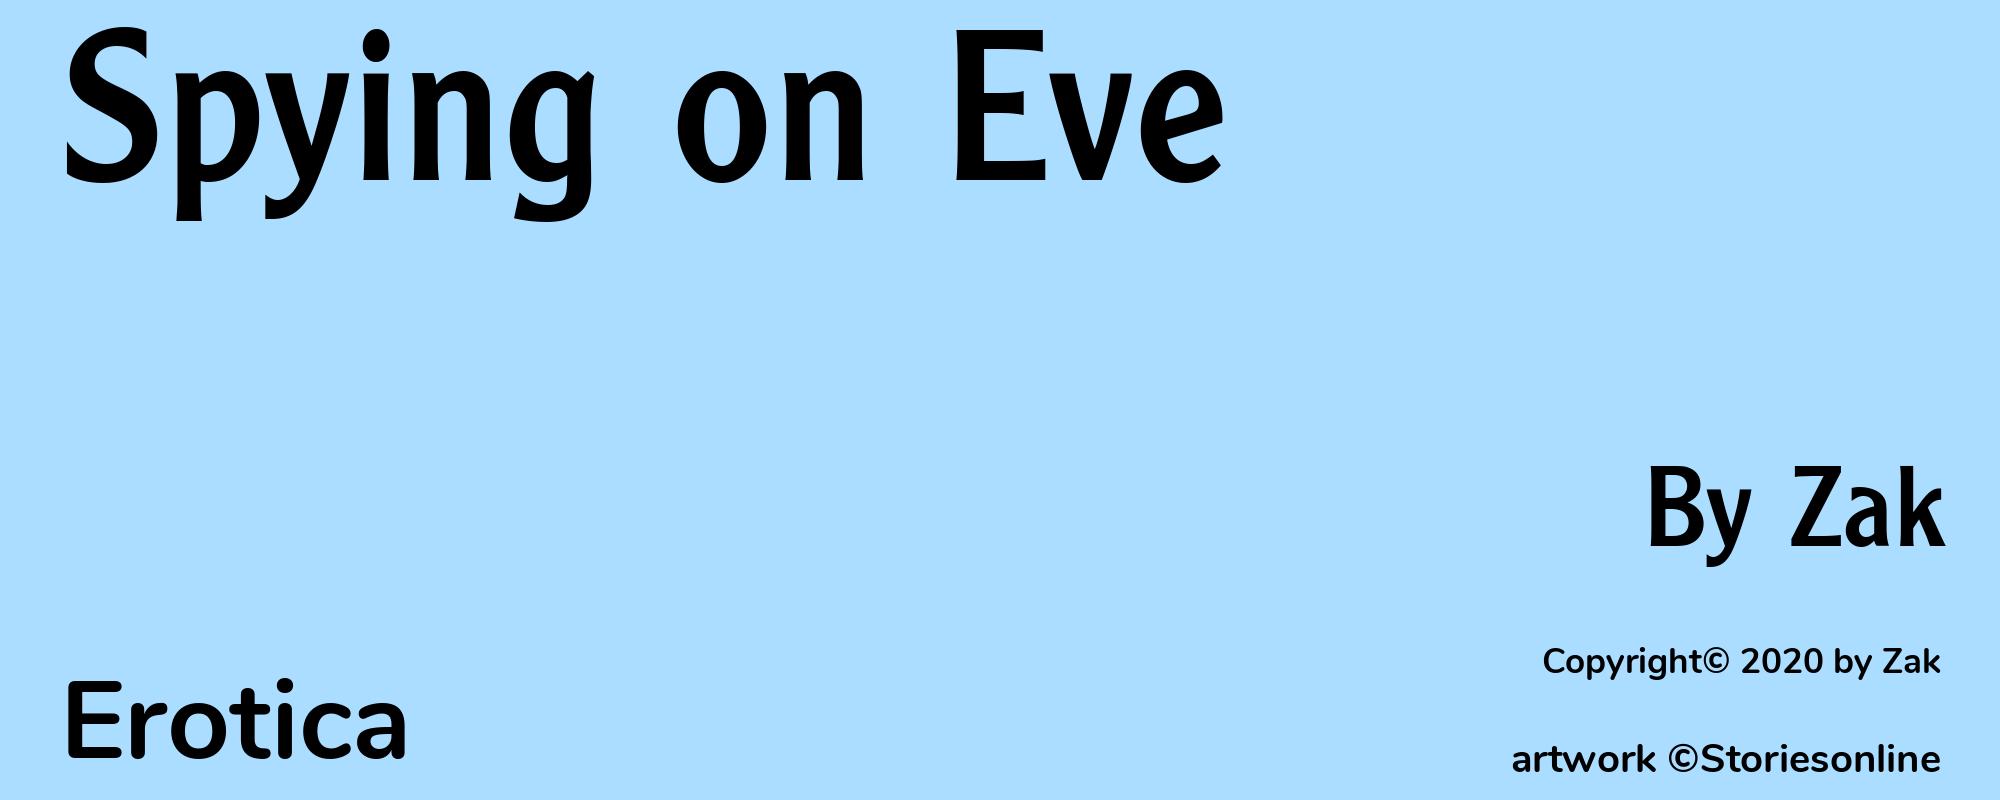 Spying on Eve - Cover